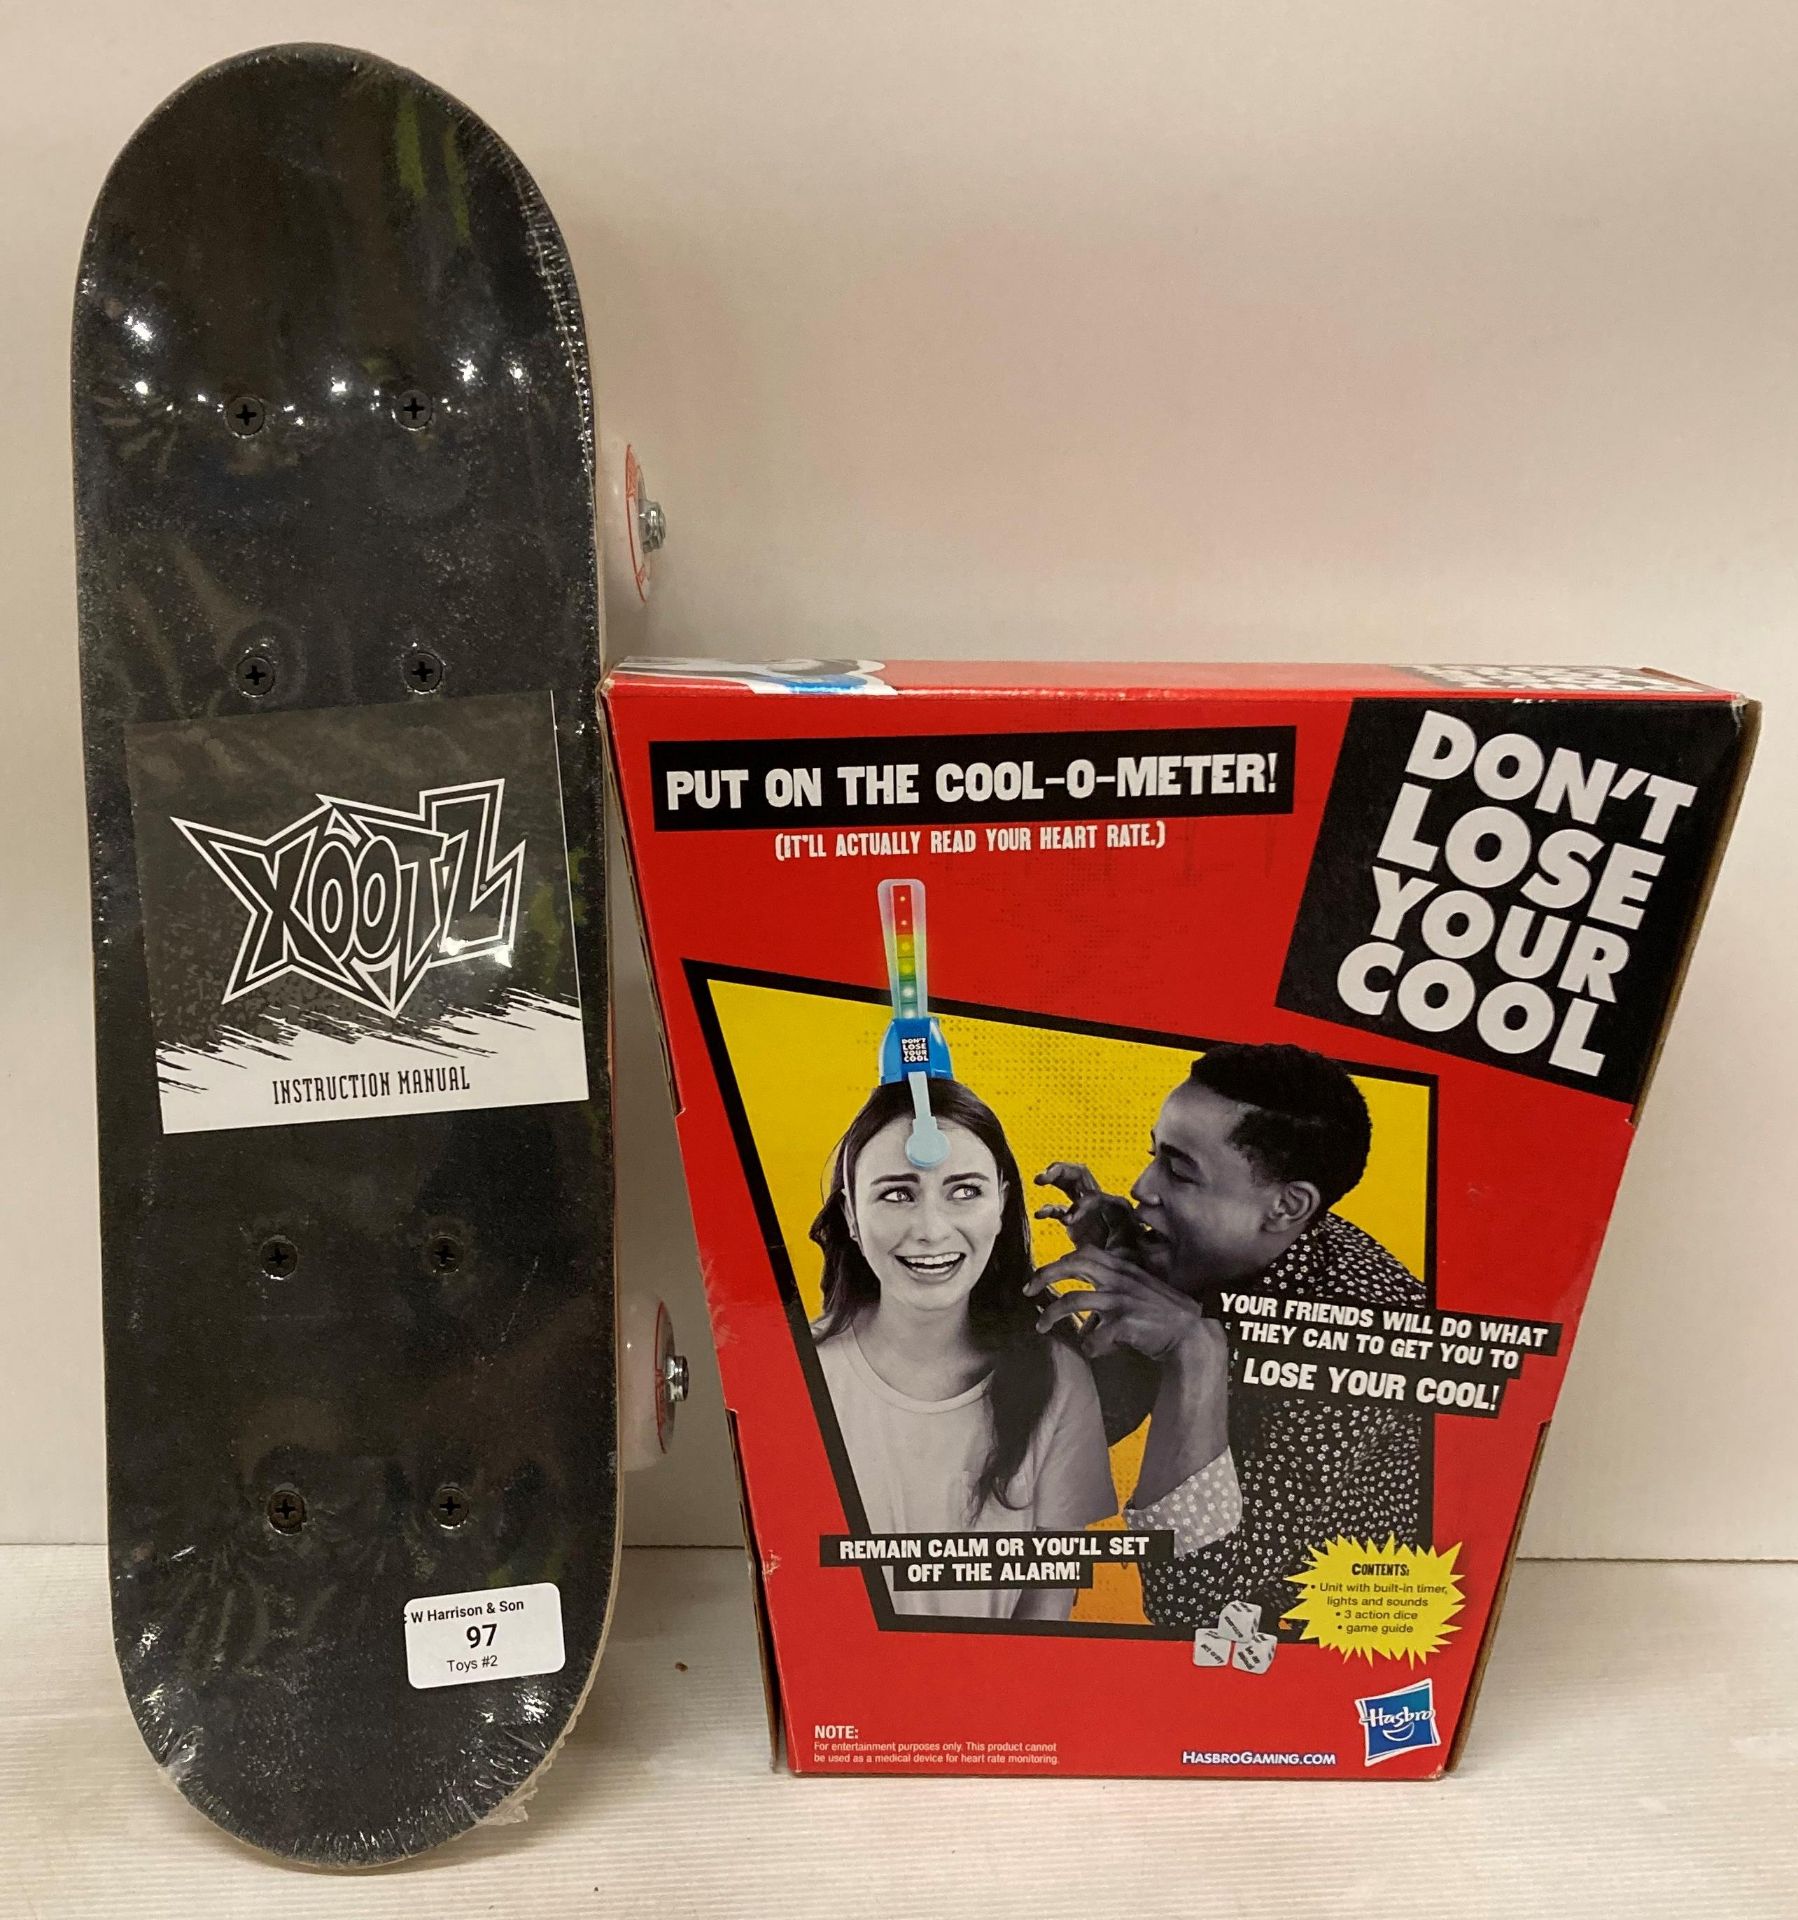 2 x Xootz Mini Skateboards and Don't Loose Your Cool games (saleroom location: M05)